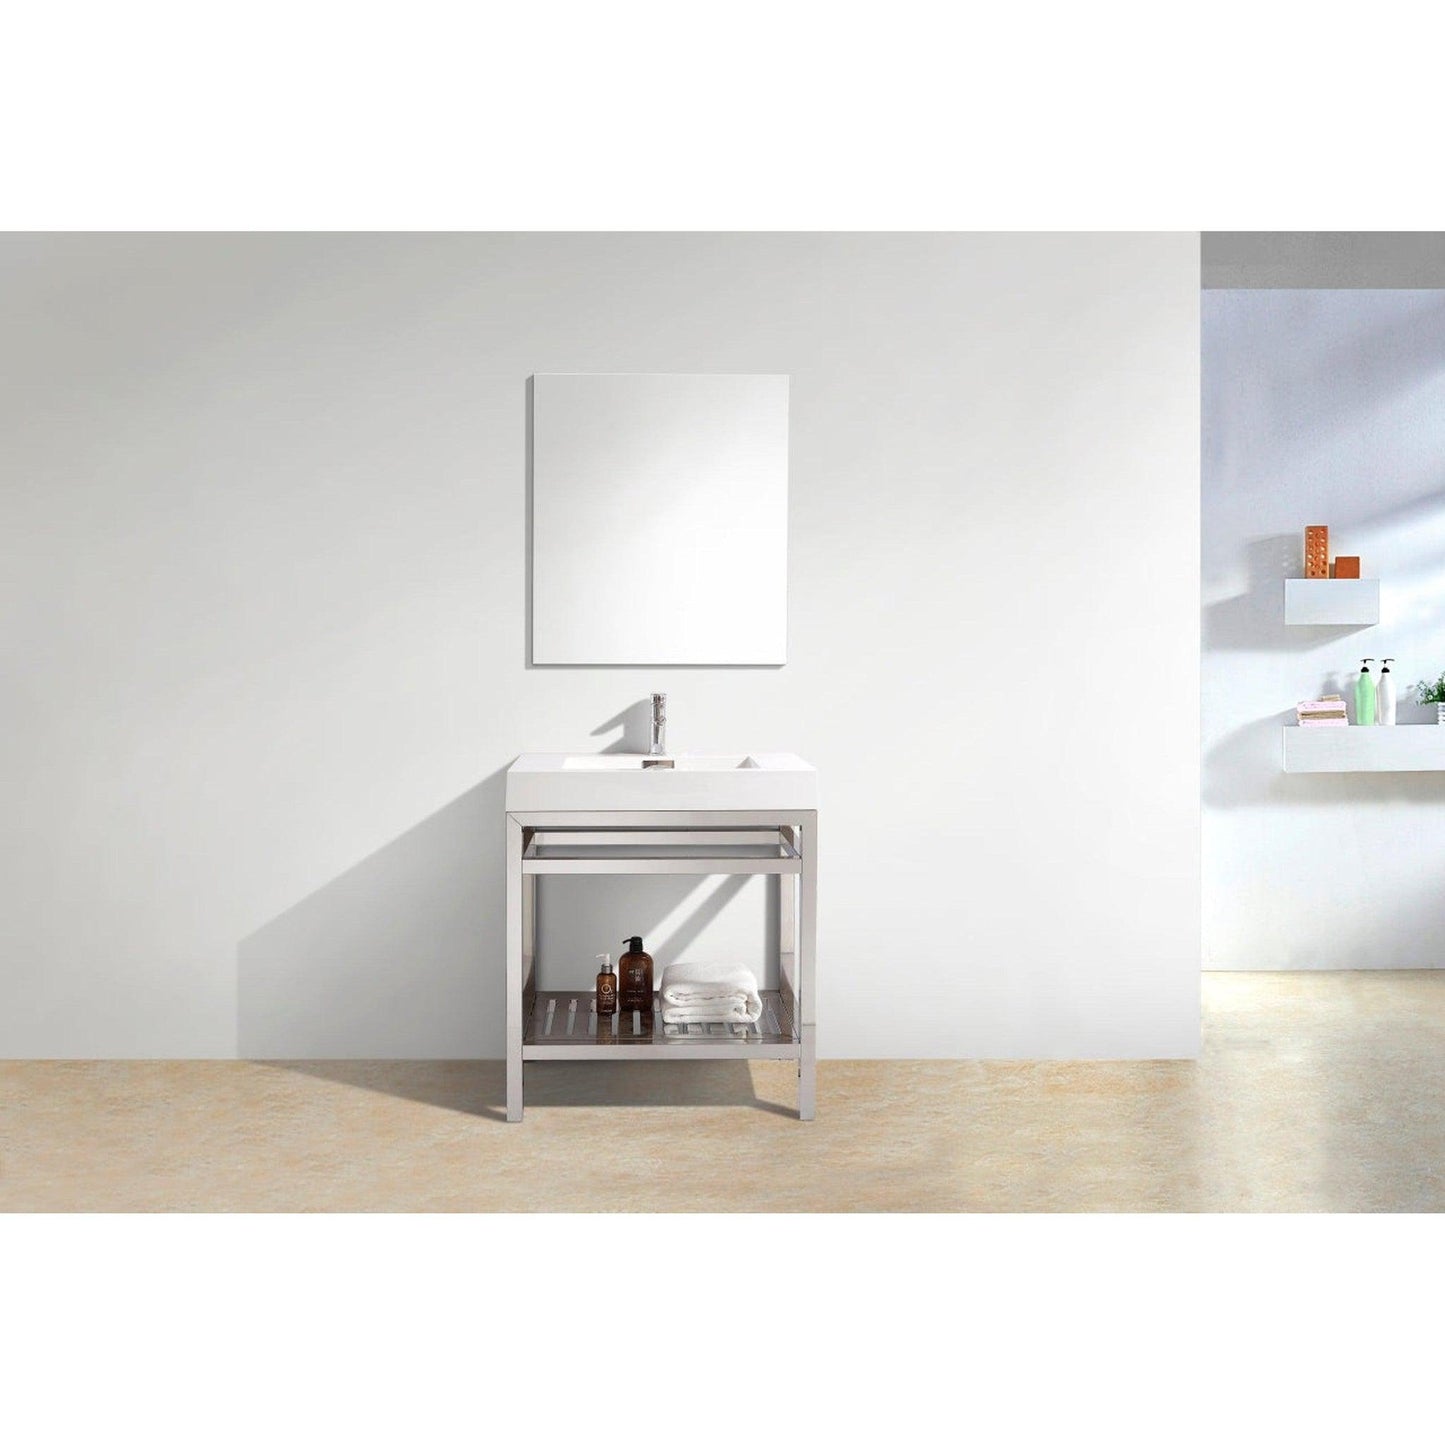 KubeBath Cisco 30" Stainless Steel Chrome Console Freestanding Modern Bathroom Vanity With Single Integrated Acrylic Sink With Overflow